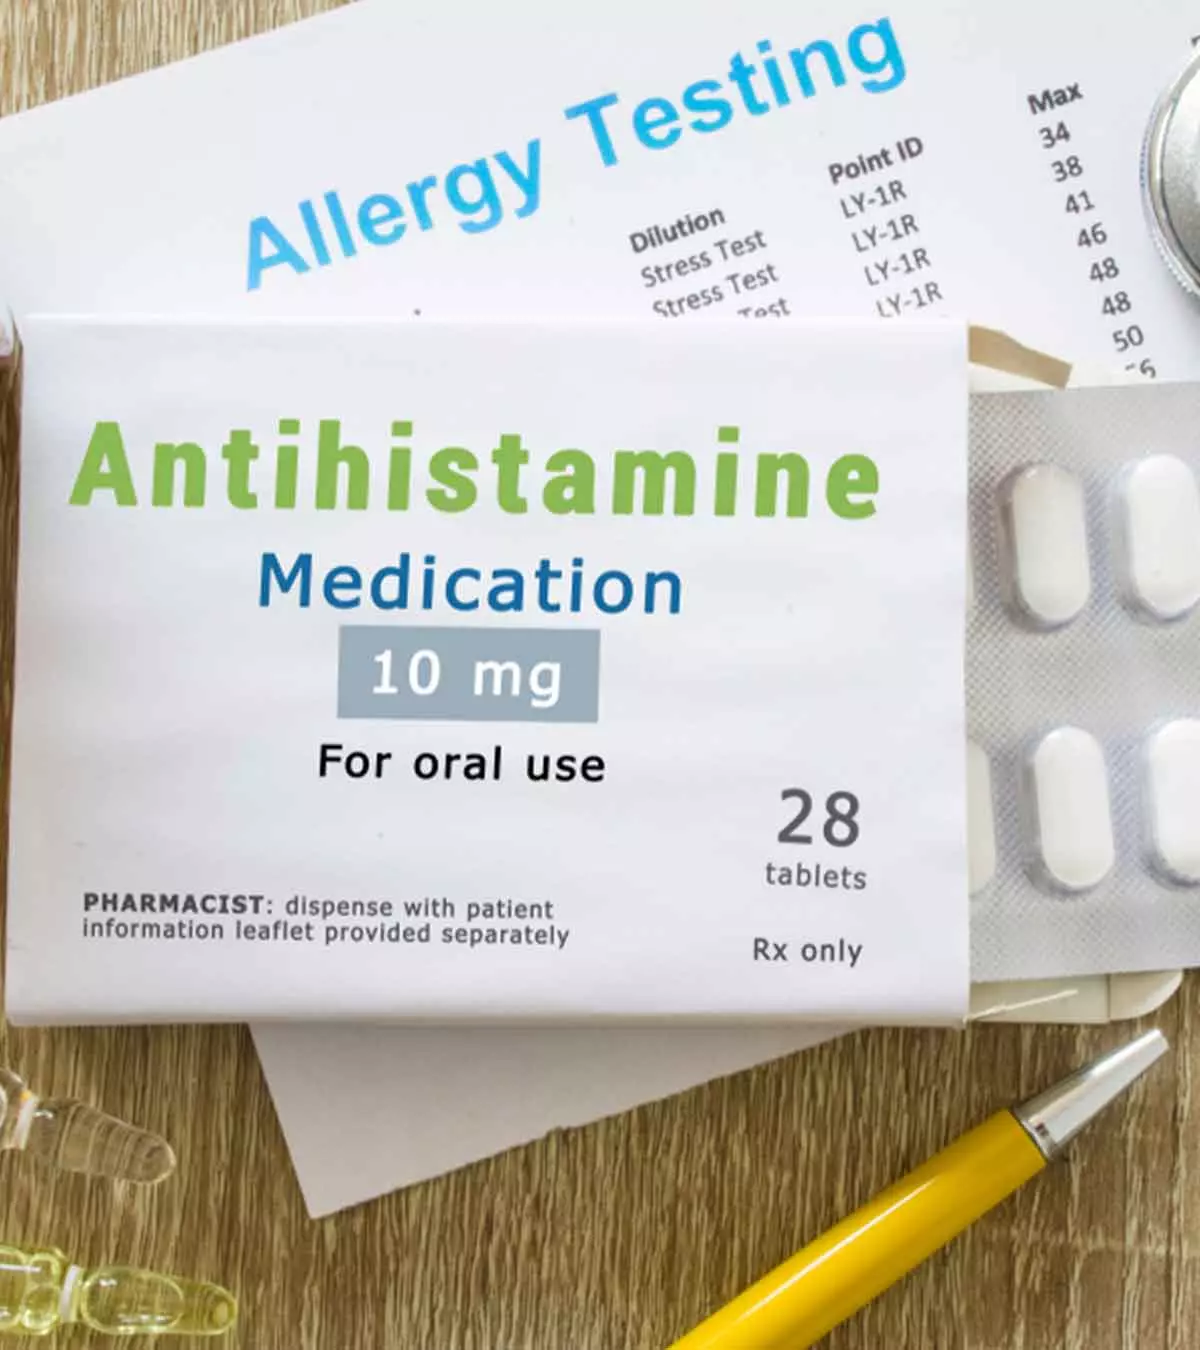 Antihistamine For Kids: Uses, Safety, Types, And Side Effects